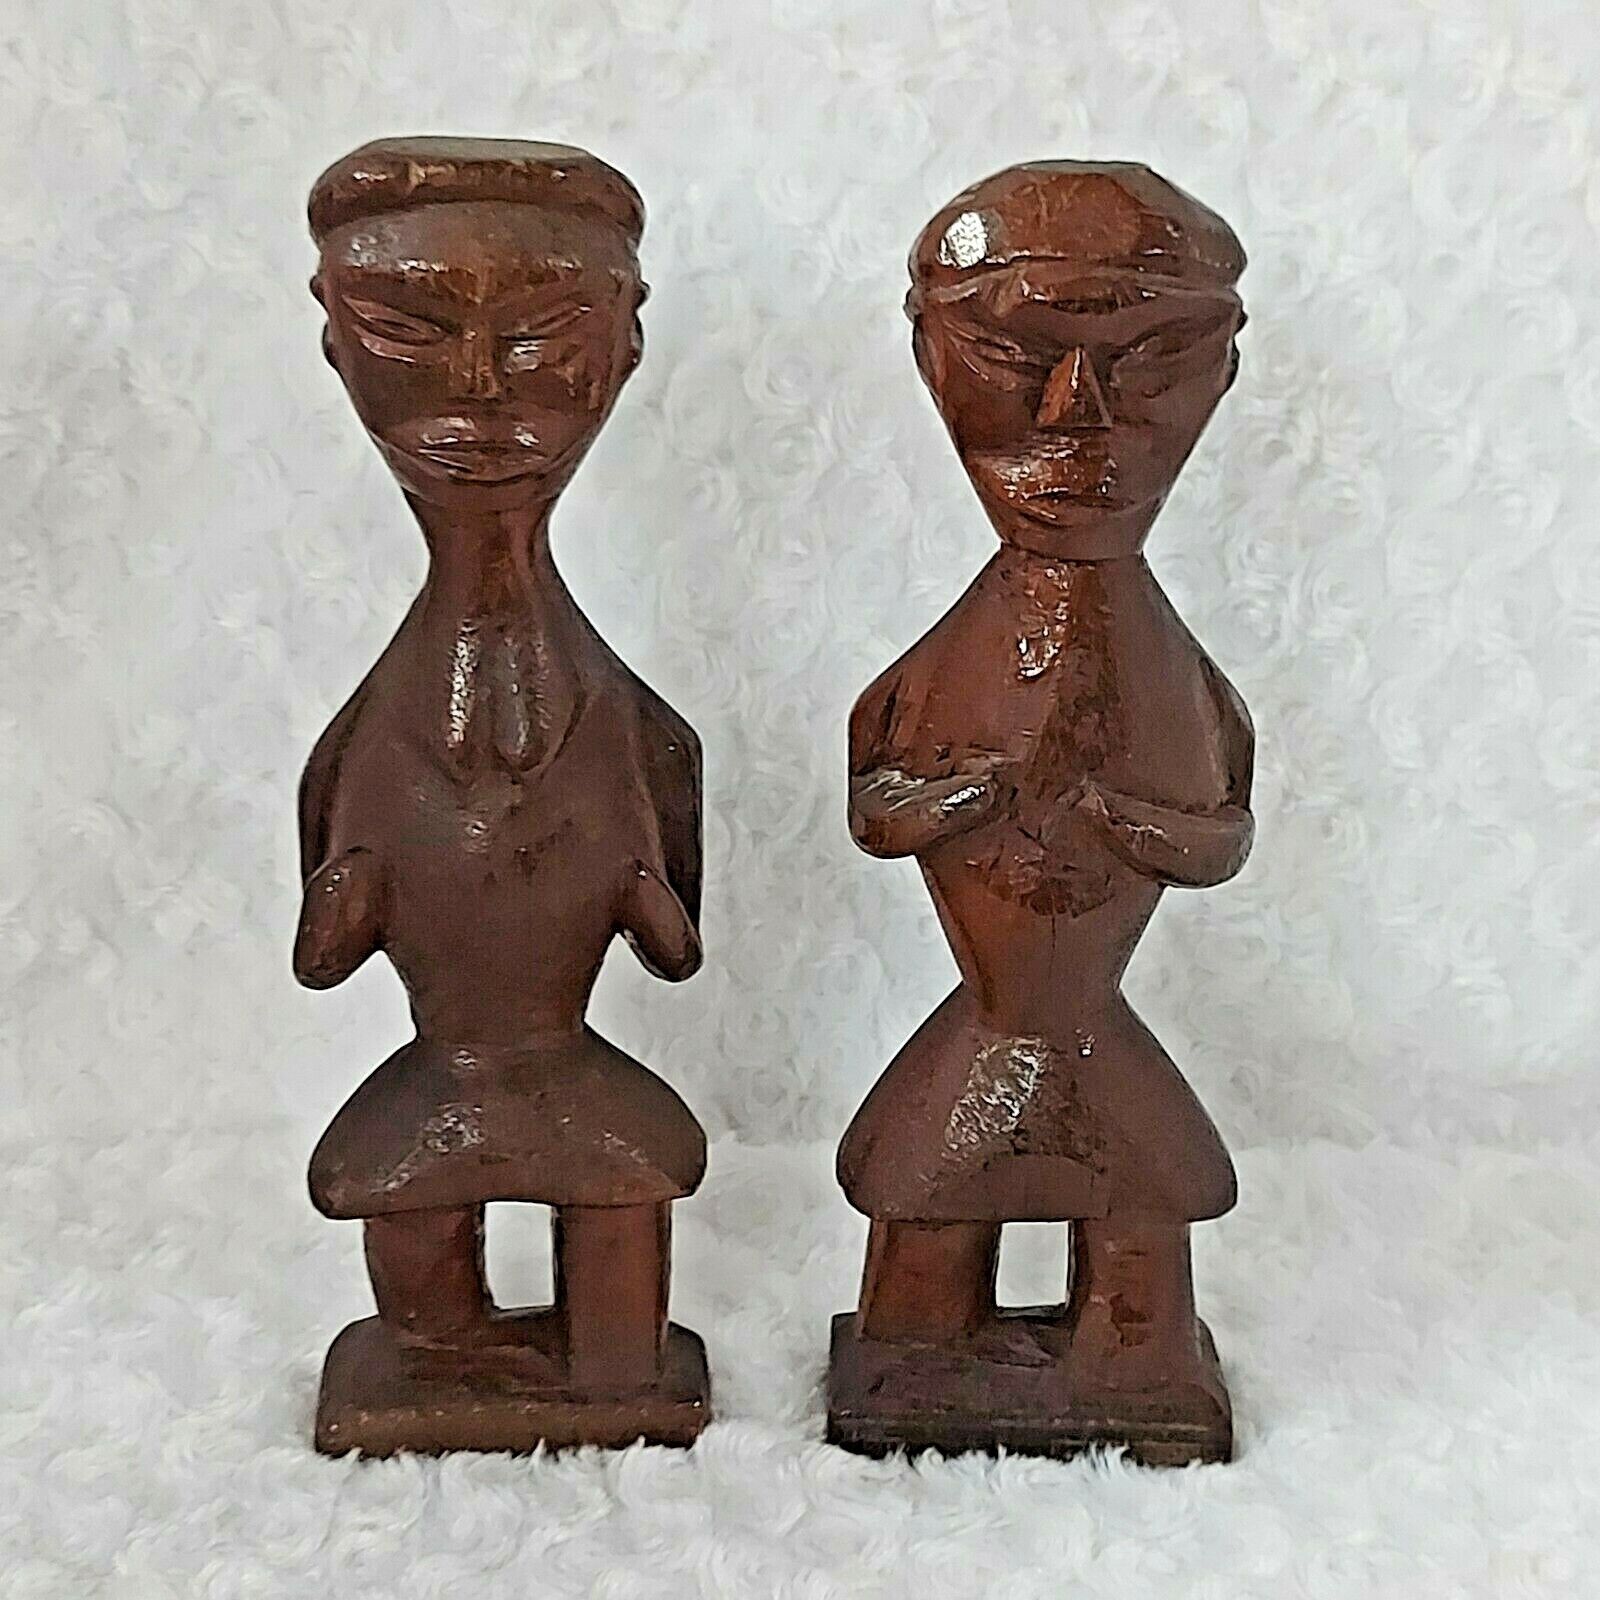 Pair of Antique African Couples Statuettes Idols Carvings Ironwood Circa 1920's